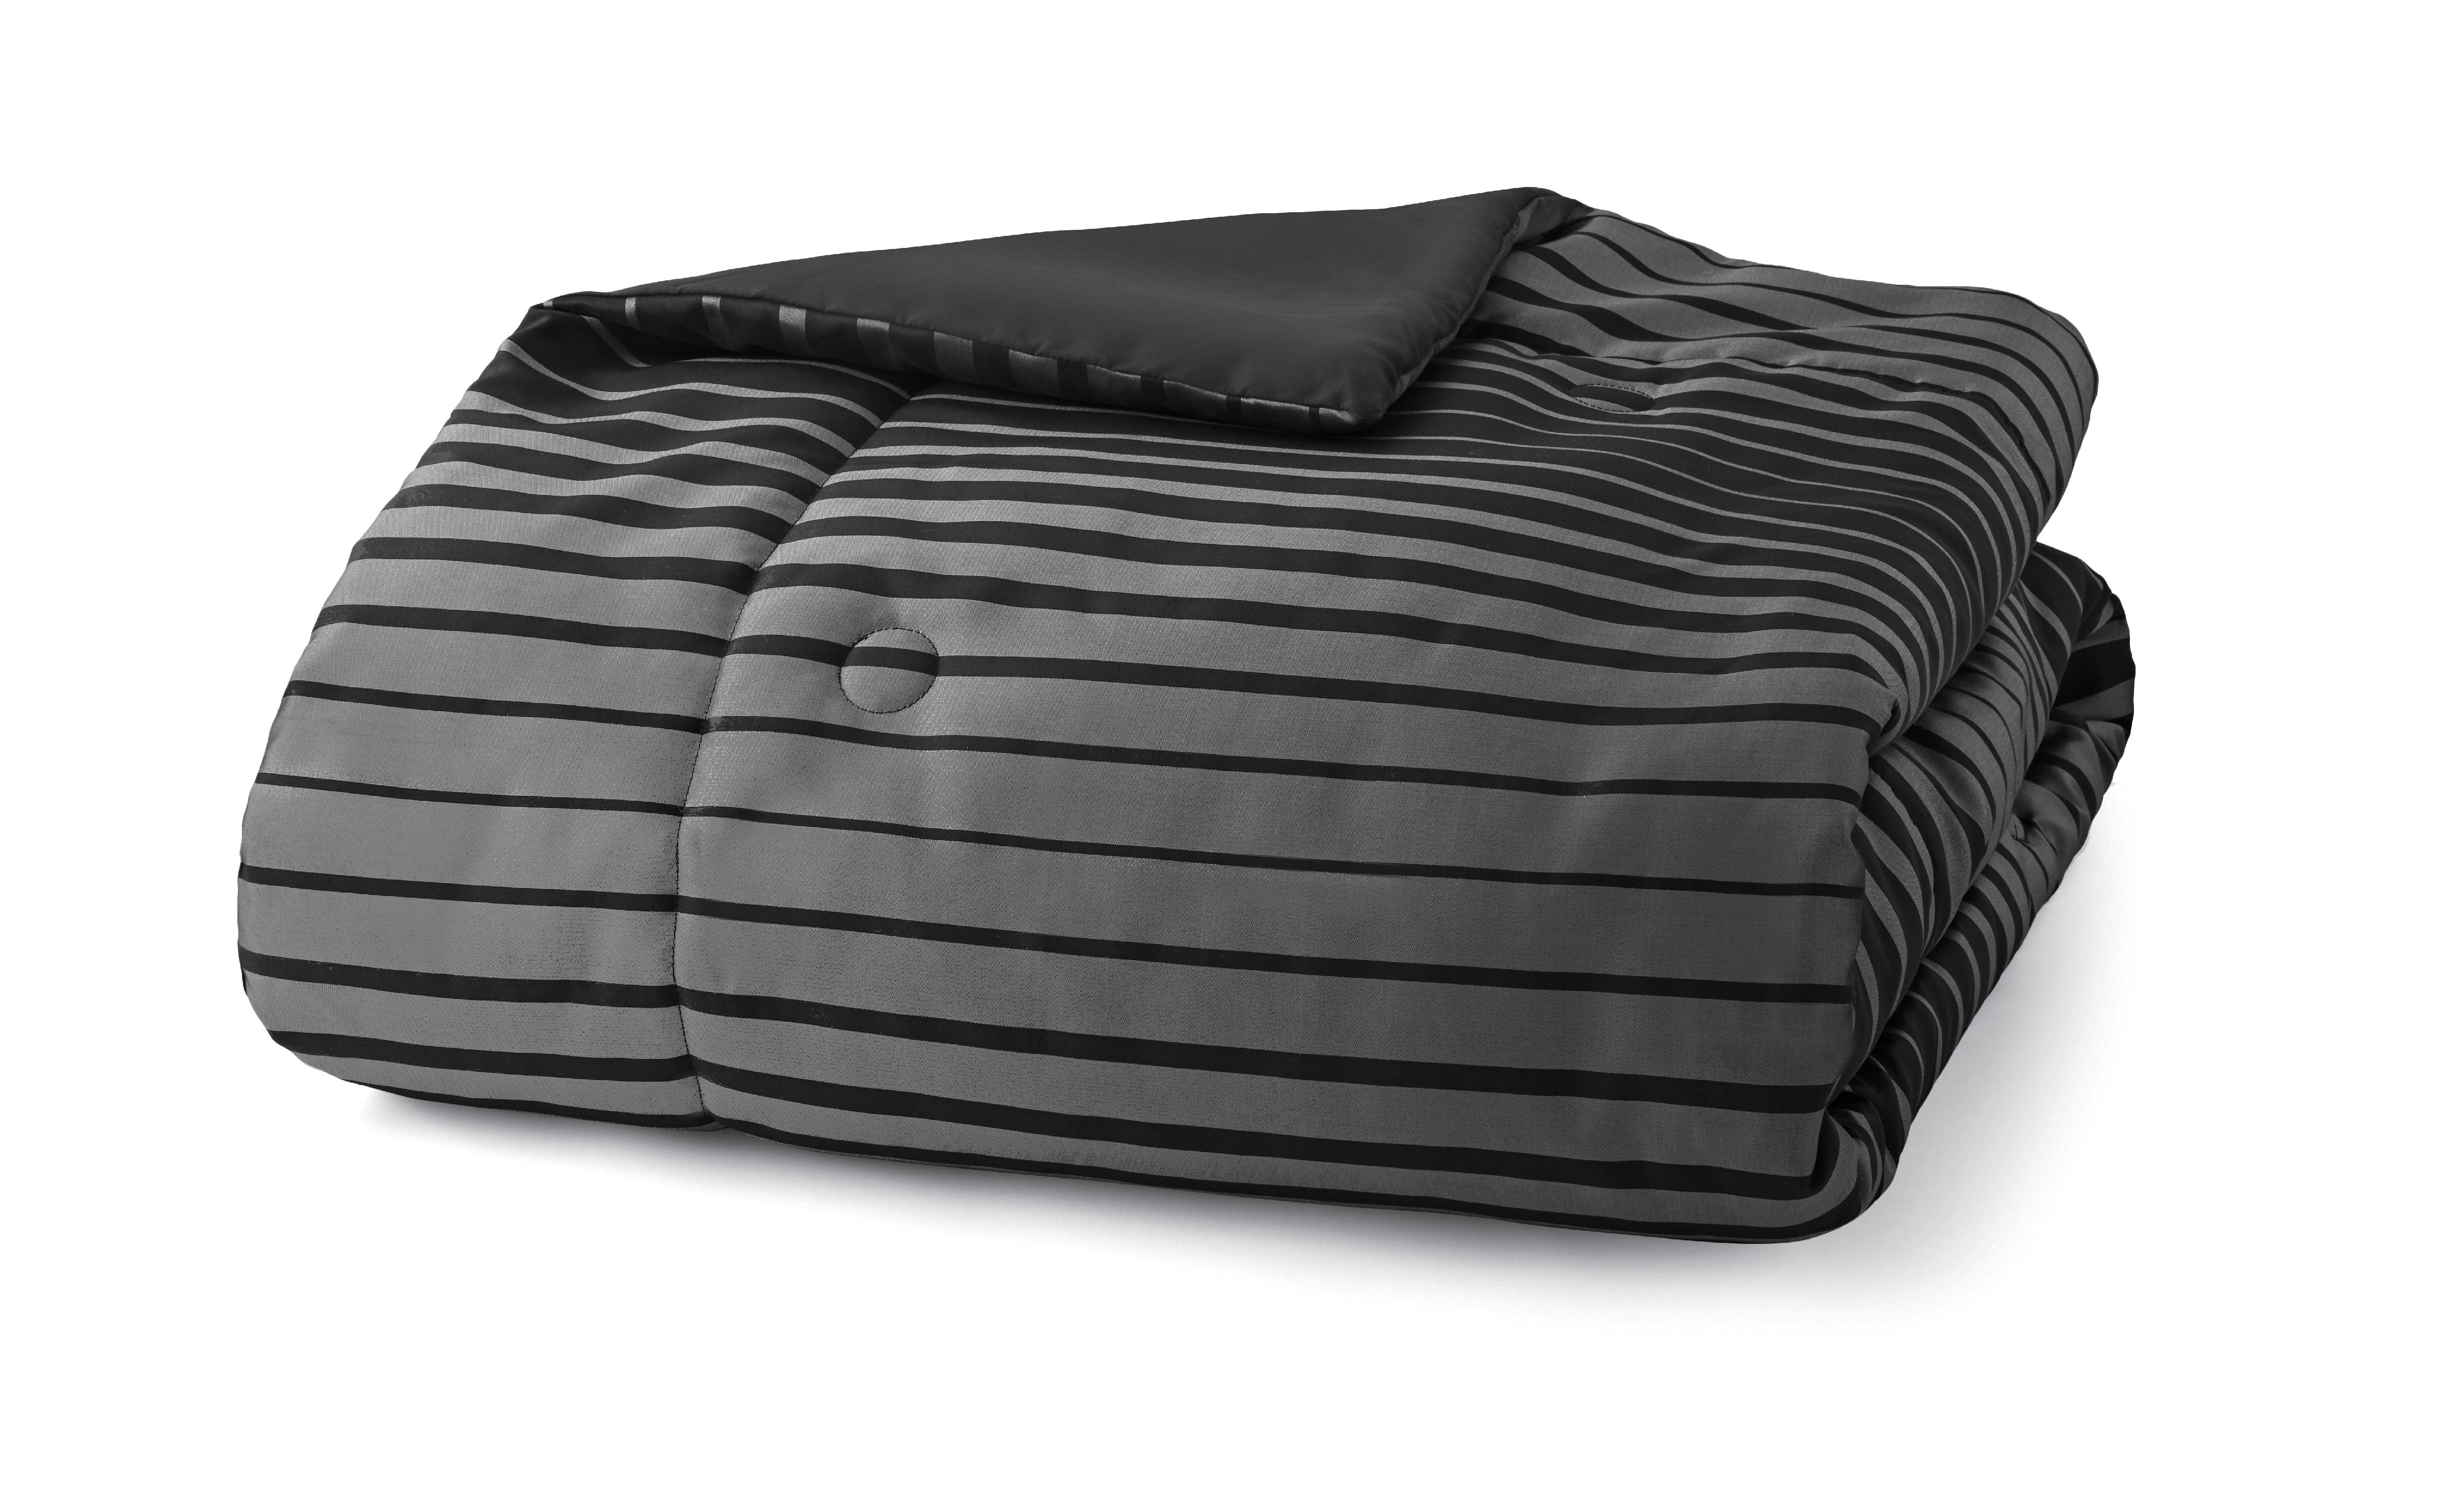 Mainstays 7-Piece Black Striped Midnight Woven Comforter Set, King - image 3 of 5